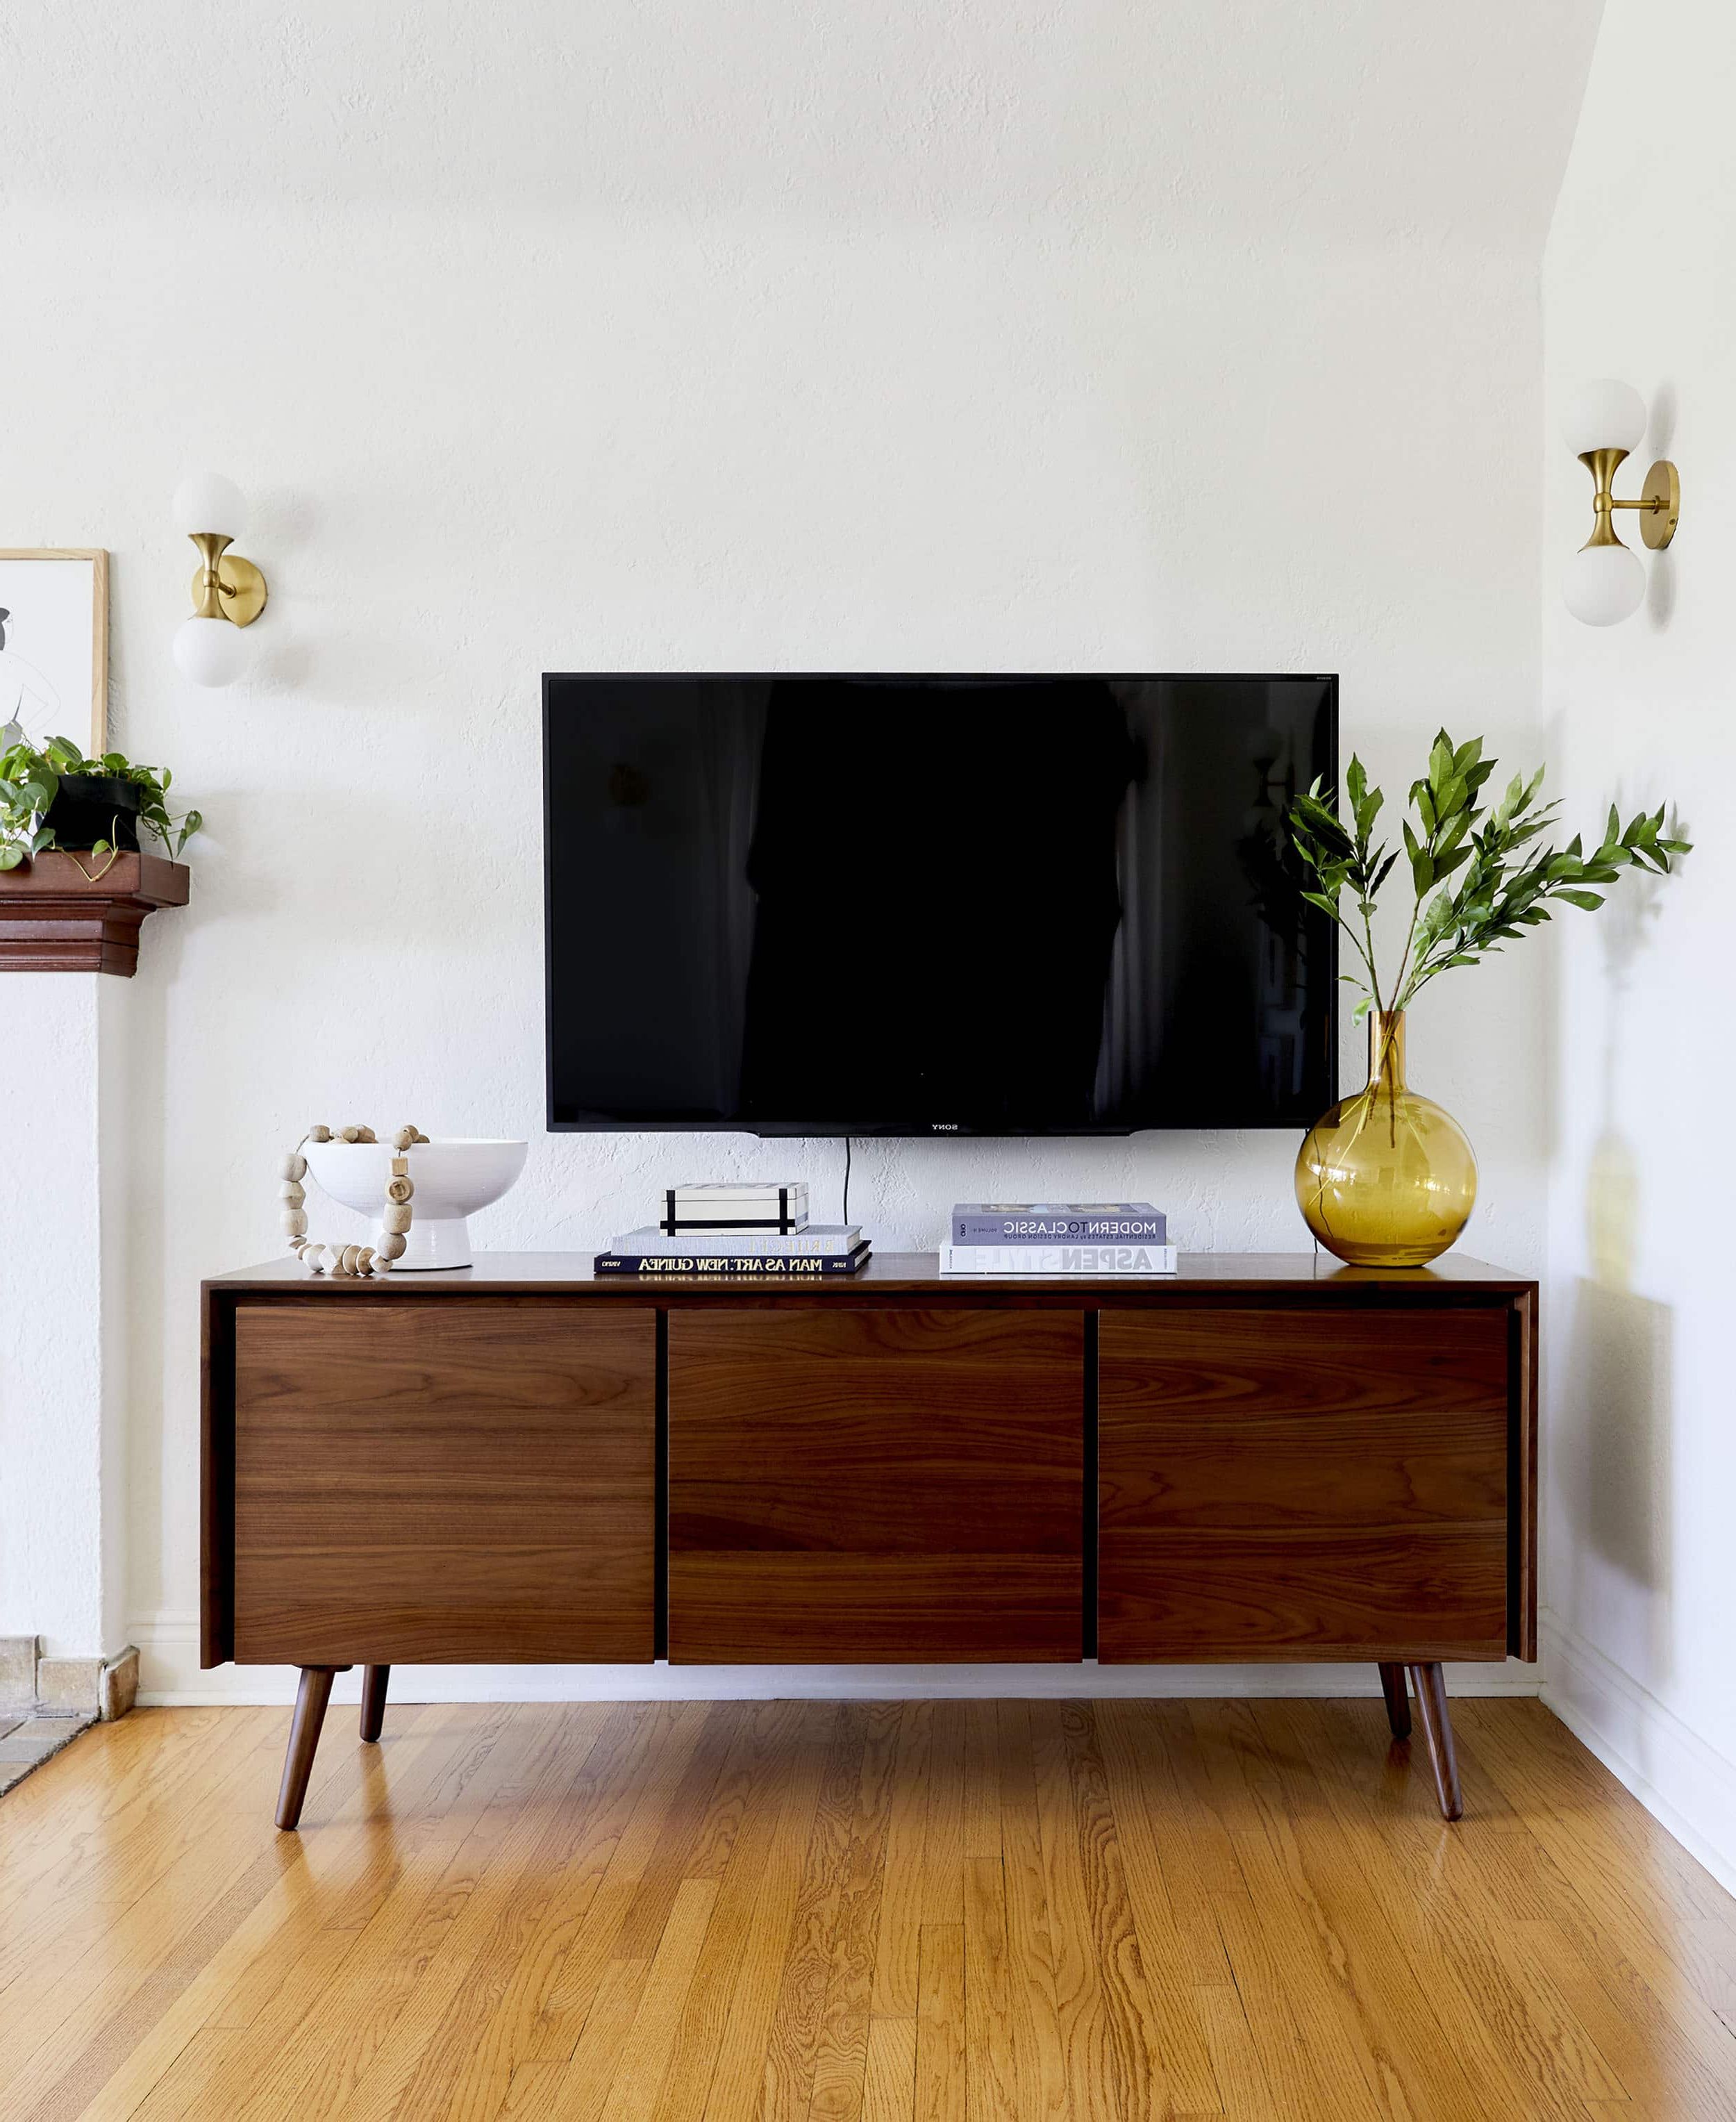 4 Ways To Style That Credenza For "real Life" + Shop Our Favorite Credenzas  – Emily Henderson Within Credenzas For Living Room (Gallery 4 of 20)